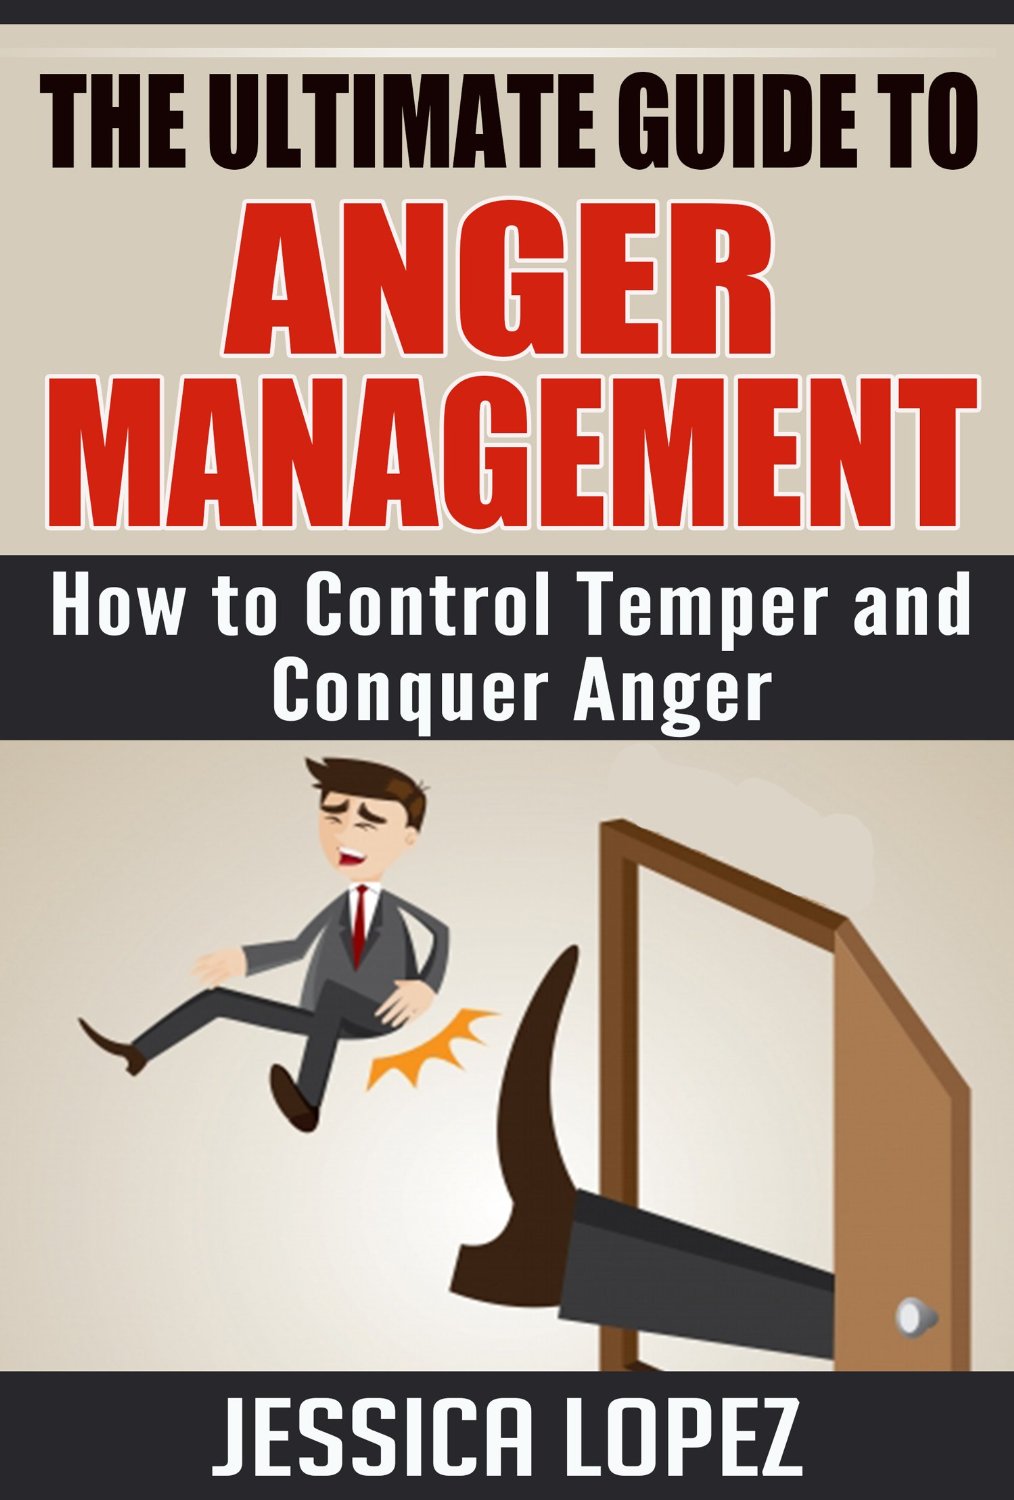 FREE: The Ultimate Guide to Anger Management by Jessica Lopez